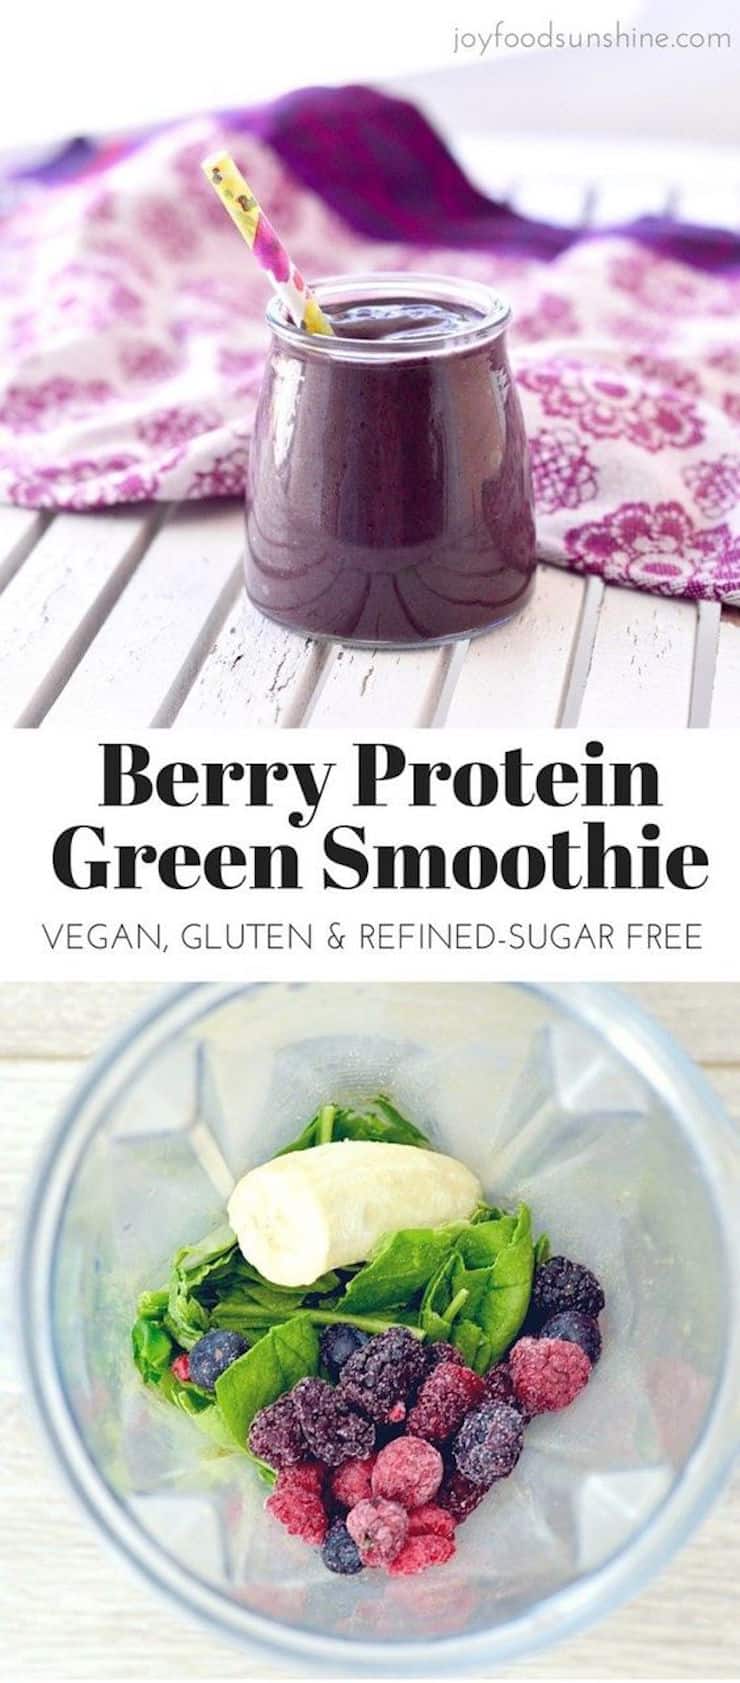 Berry Protein Green Smoothie